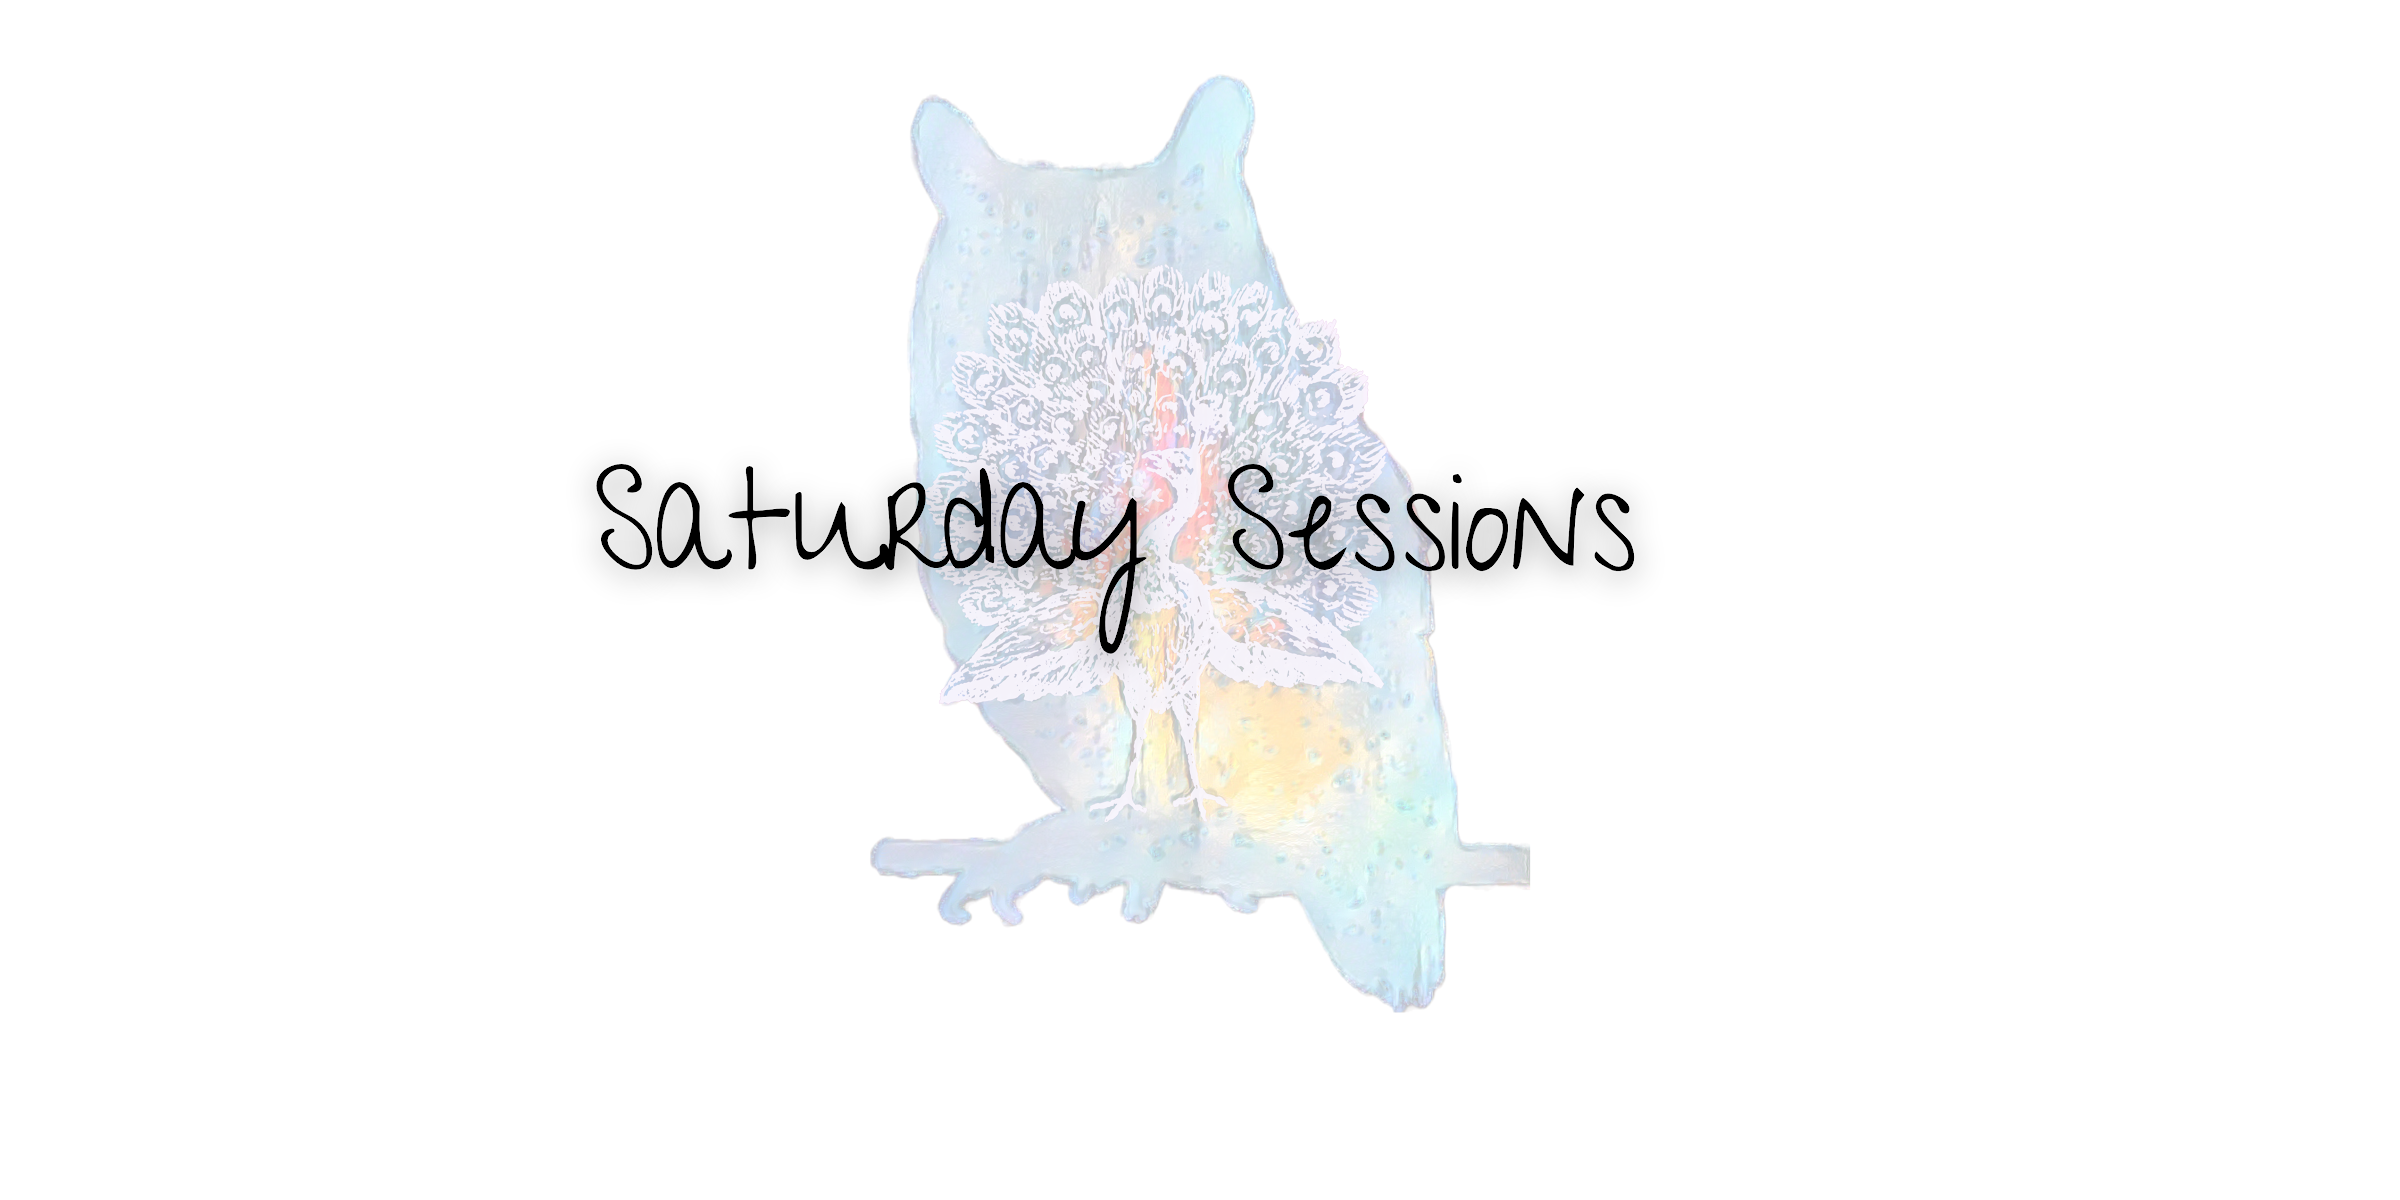 Saturday Sessions: Confronting the Shadows of Our Past